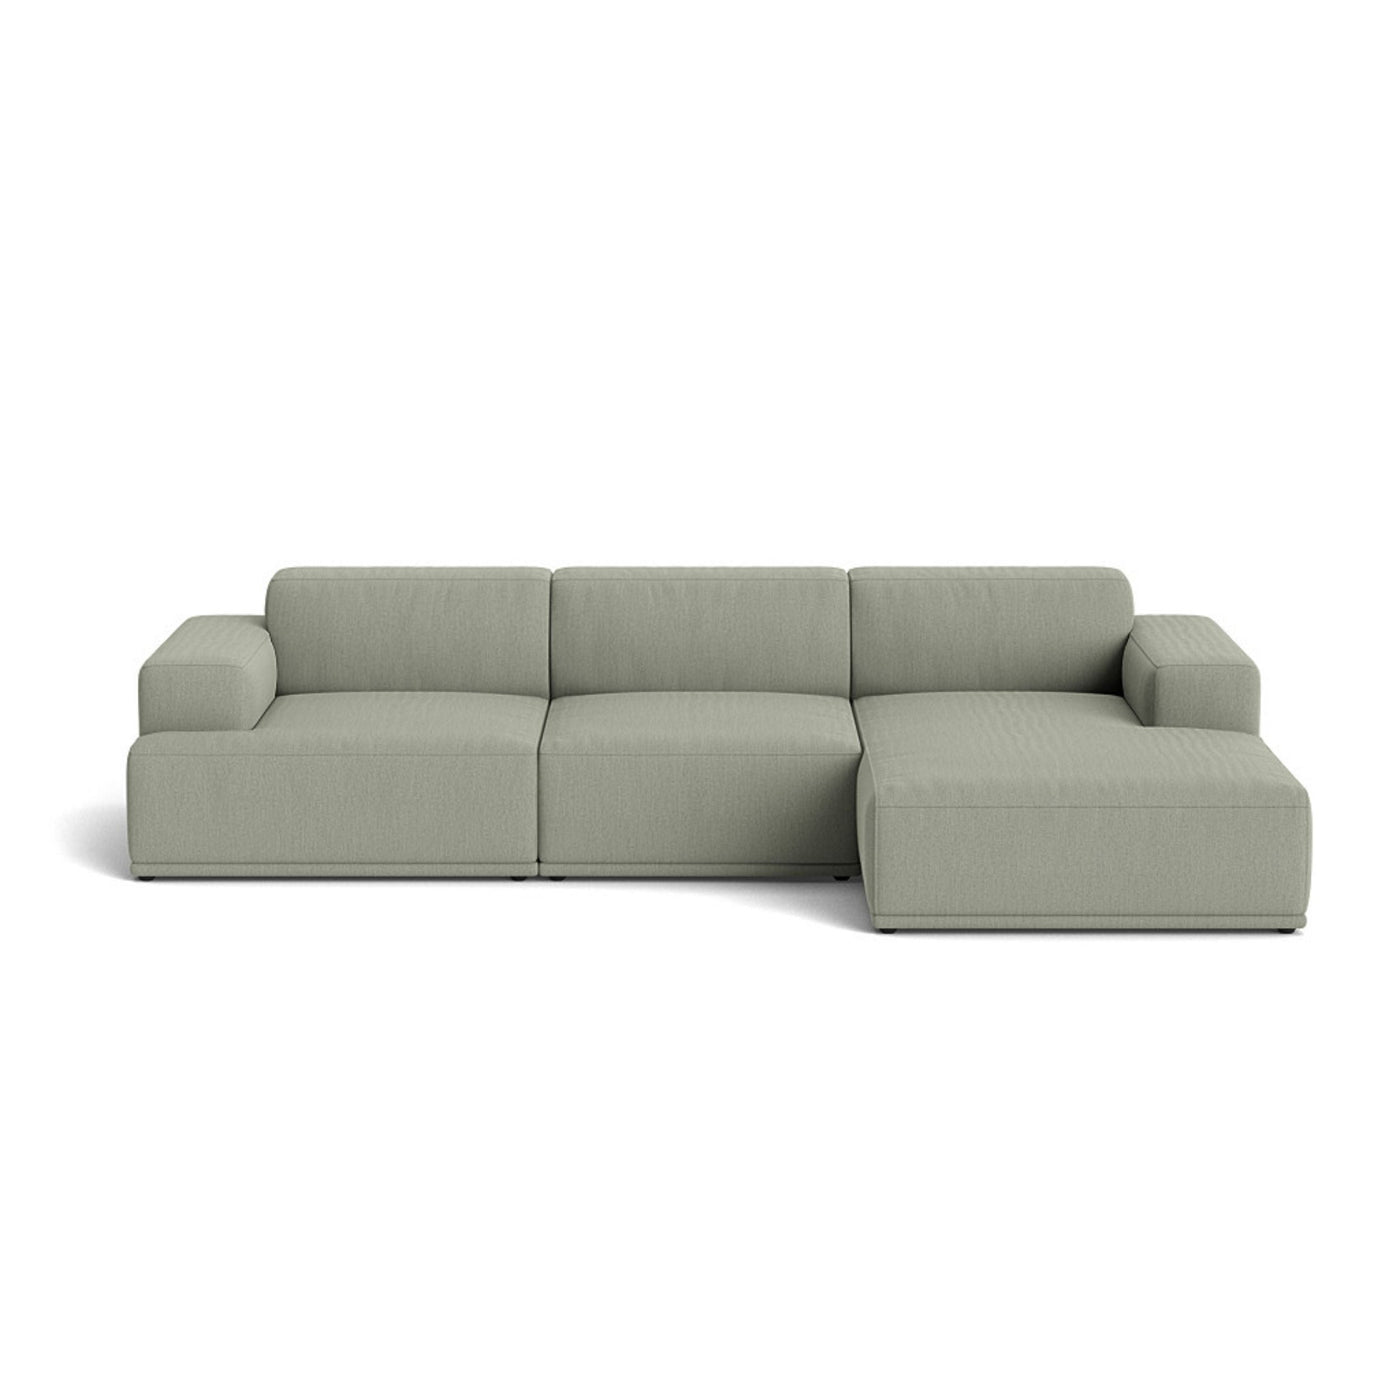 Muuto Connect Soft Modular 3 Seater Sofa, configuration 3. Made-to-order from someday designs. #colour_re-wool-408